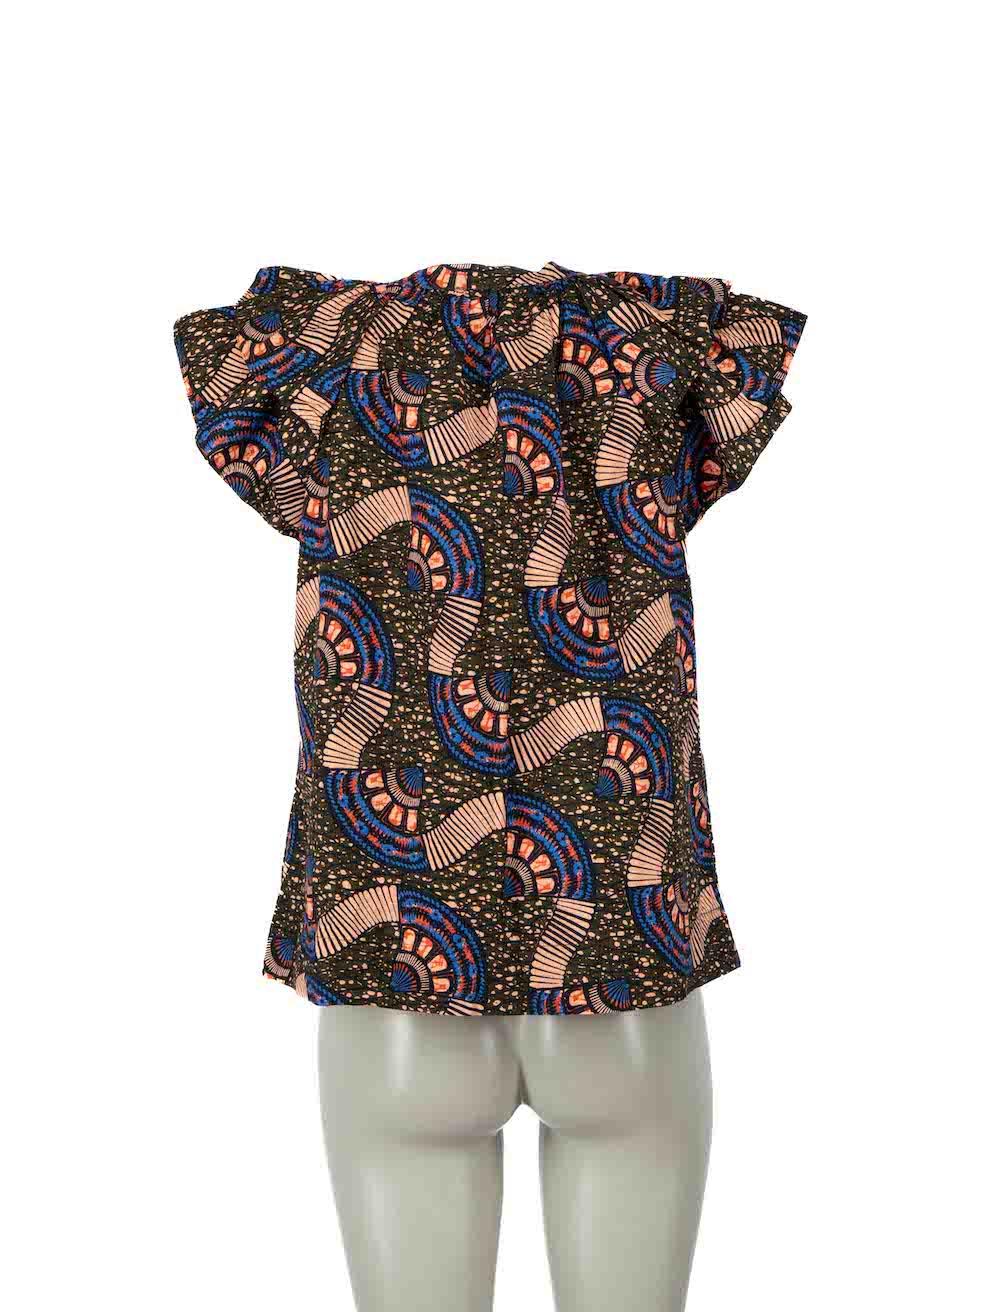 Ulla Johnson Abstract Pattern Ruffle Accent Top Size S In Excellent Condition For Sale In London, GB